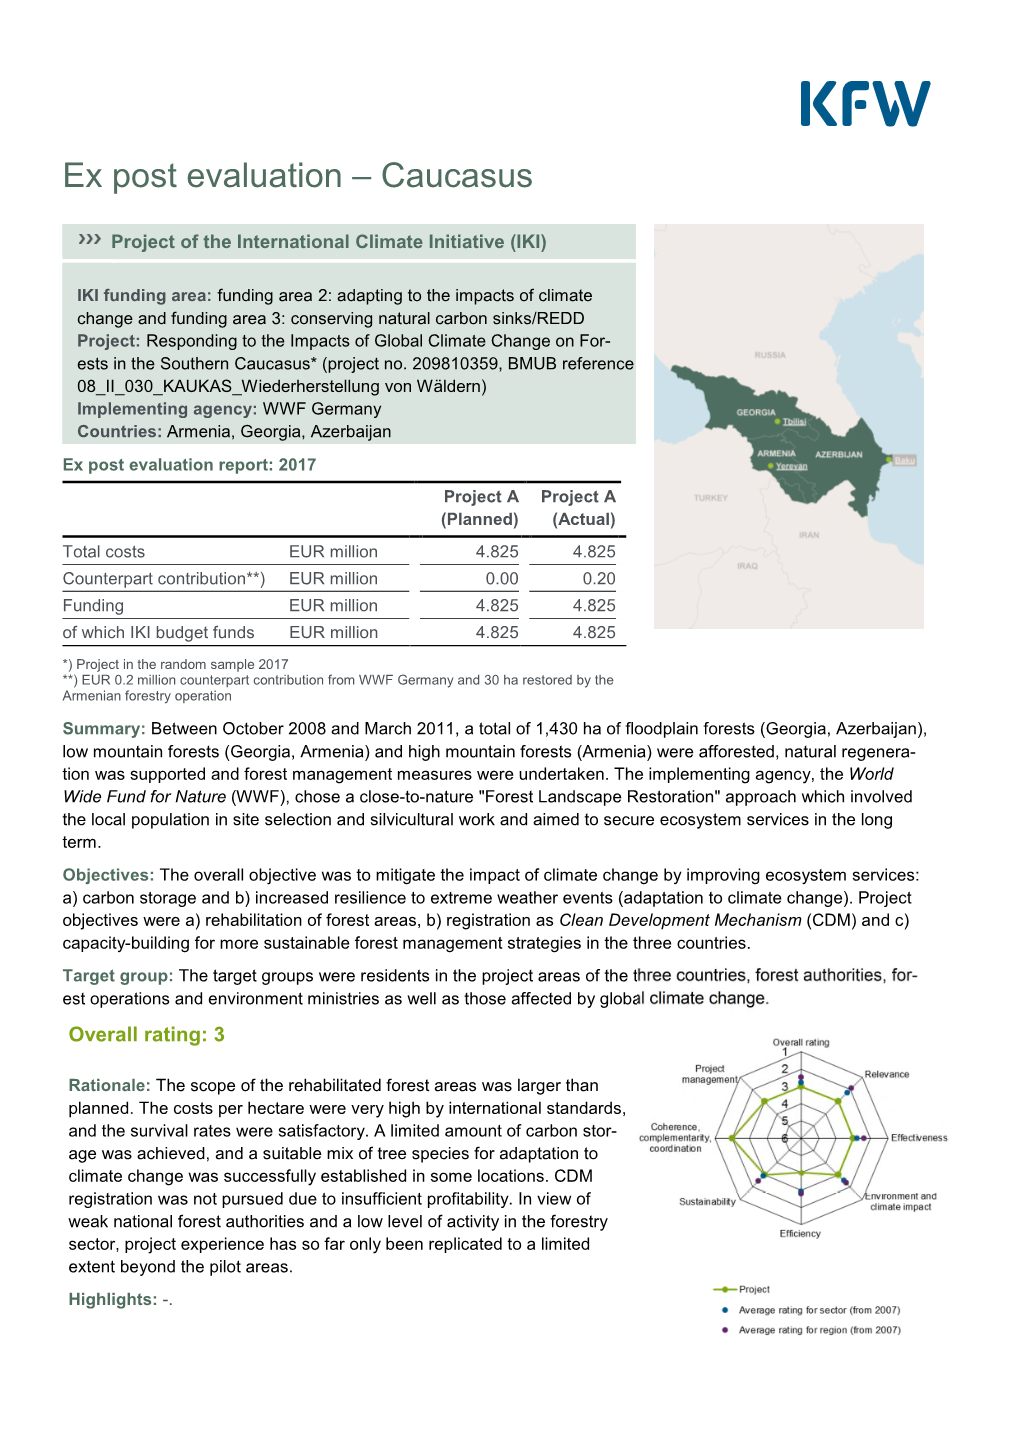 Responding to the Impacts of Global Climate Change on For- Ests in the Southern Caucasus* (Project No